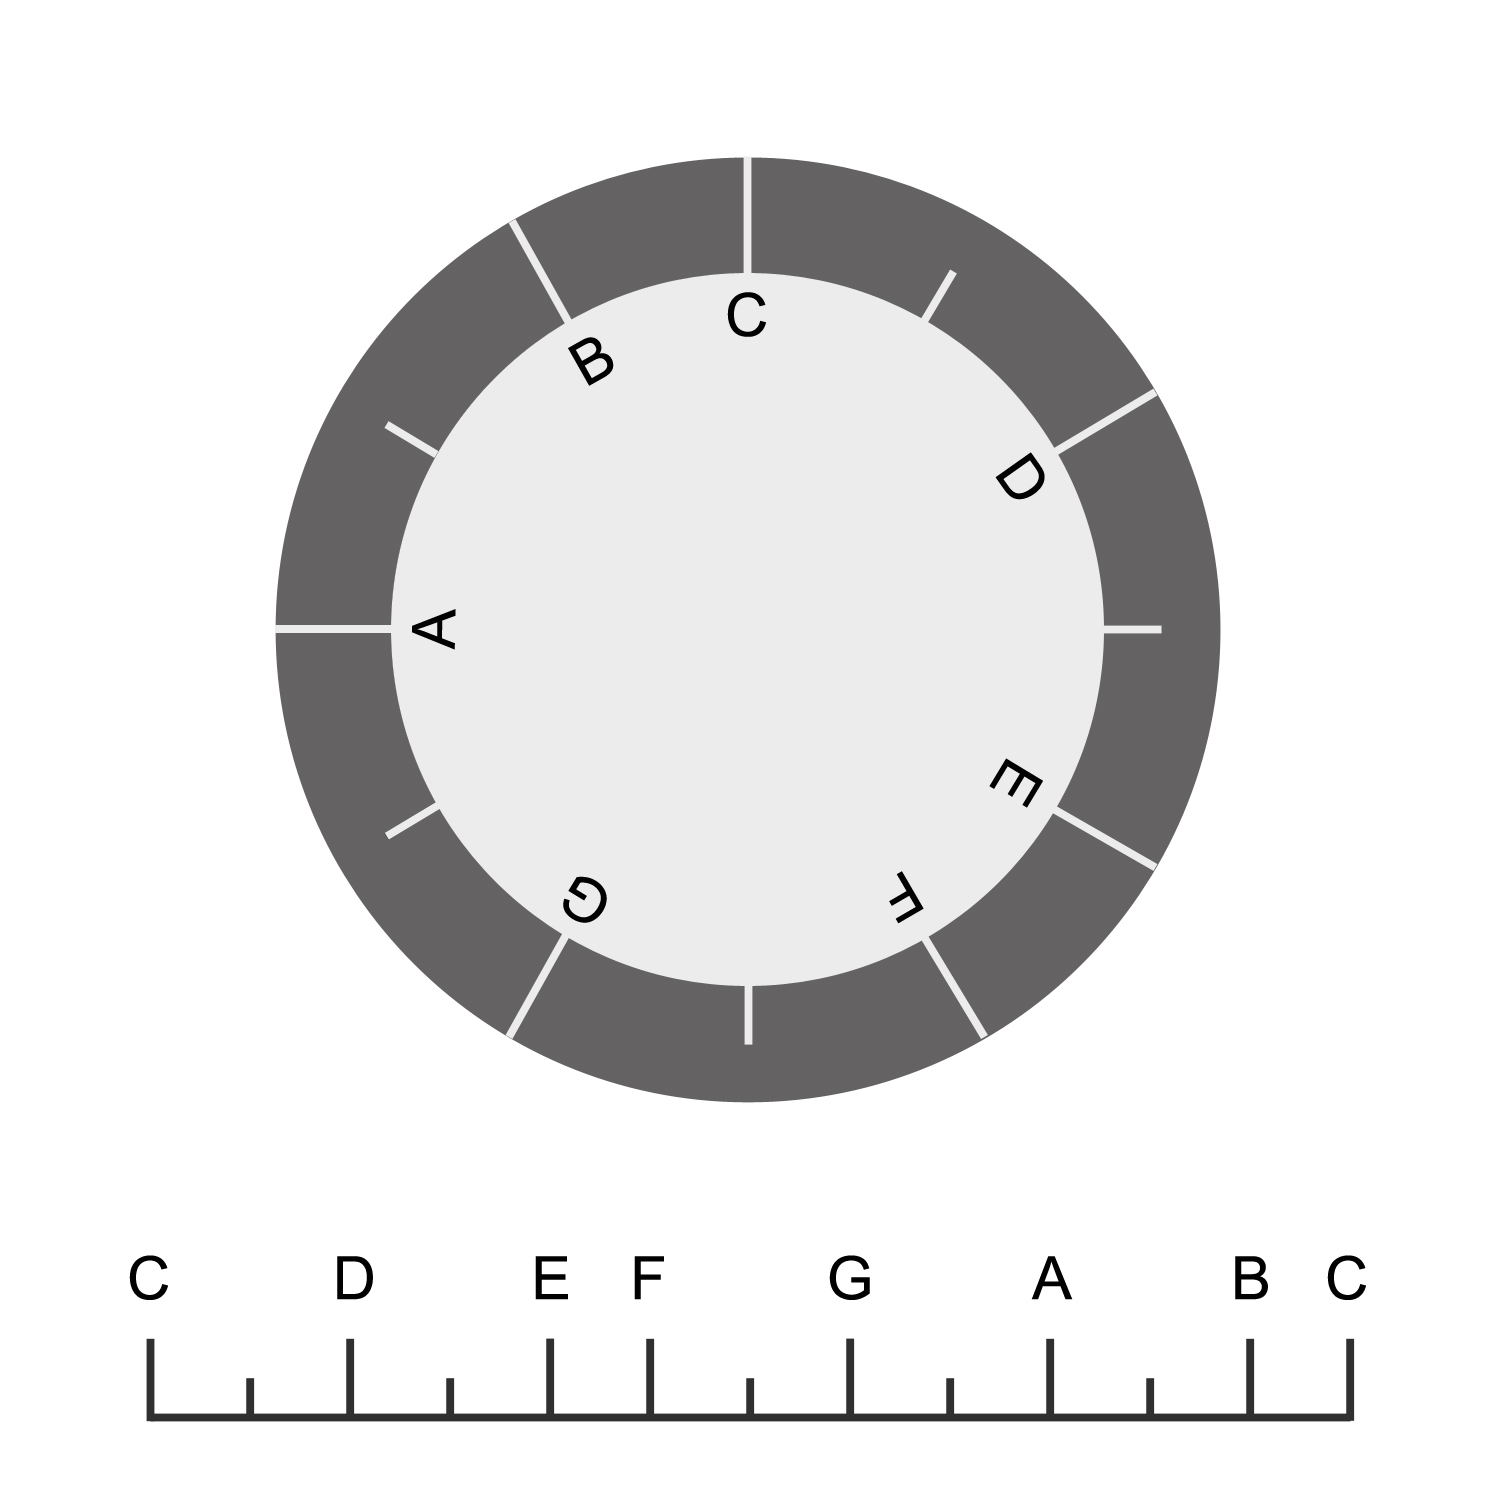 Circular and linear representation of the basic tone scale